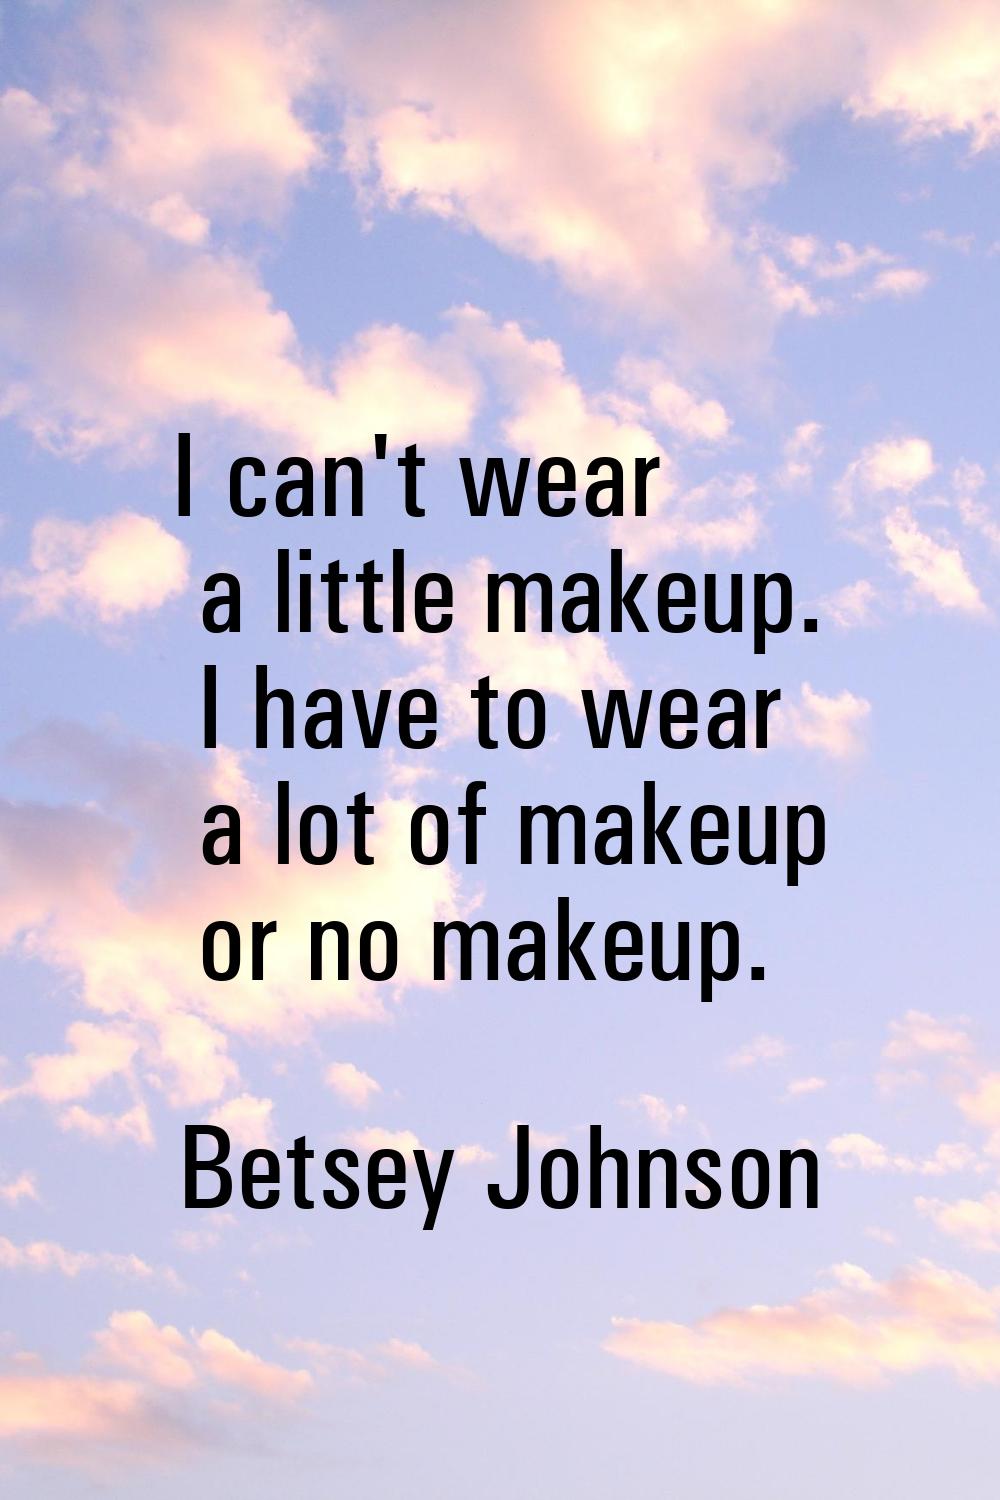 I can't wear a little makeup. I have to wear a lot of makeup or no makeup.